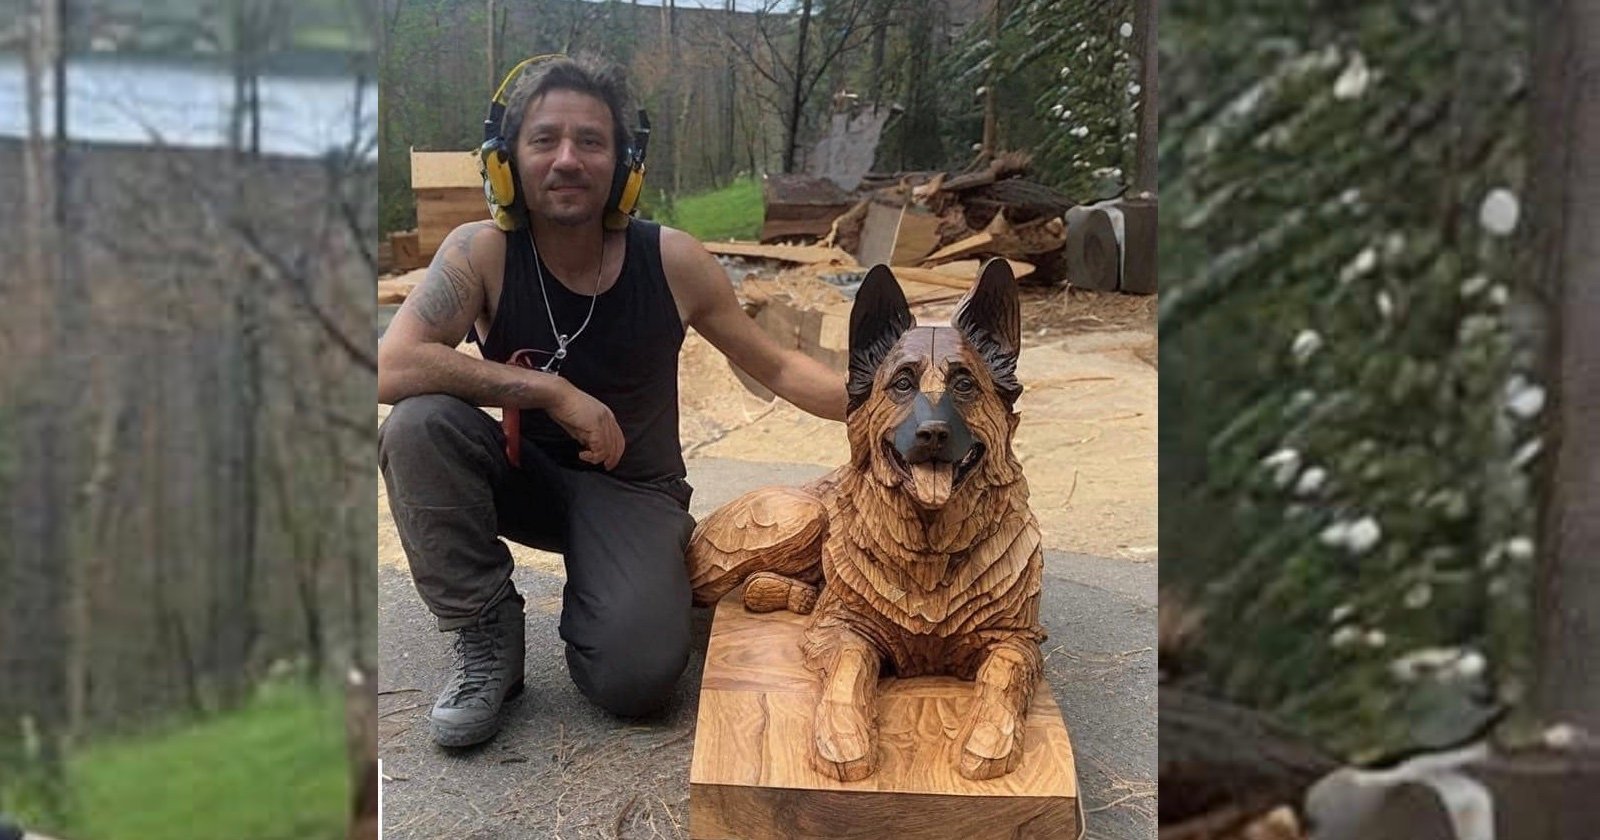 ai-generated image of man with carving of dog keeps going viral